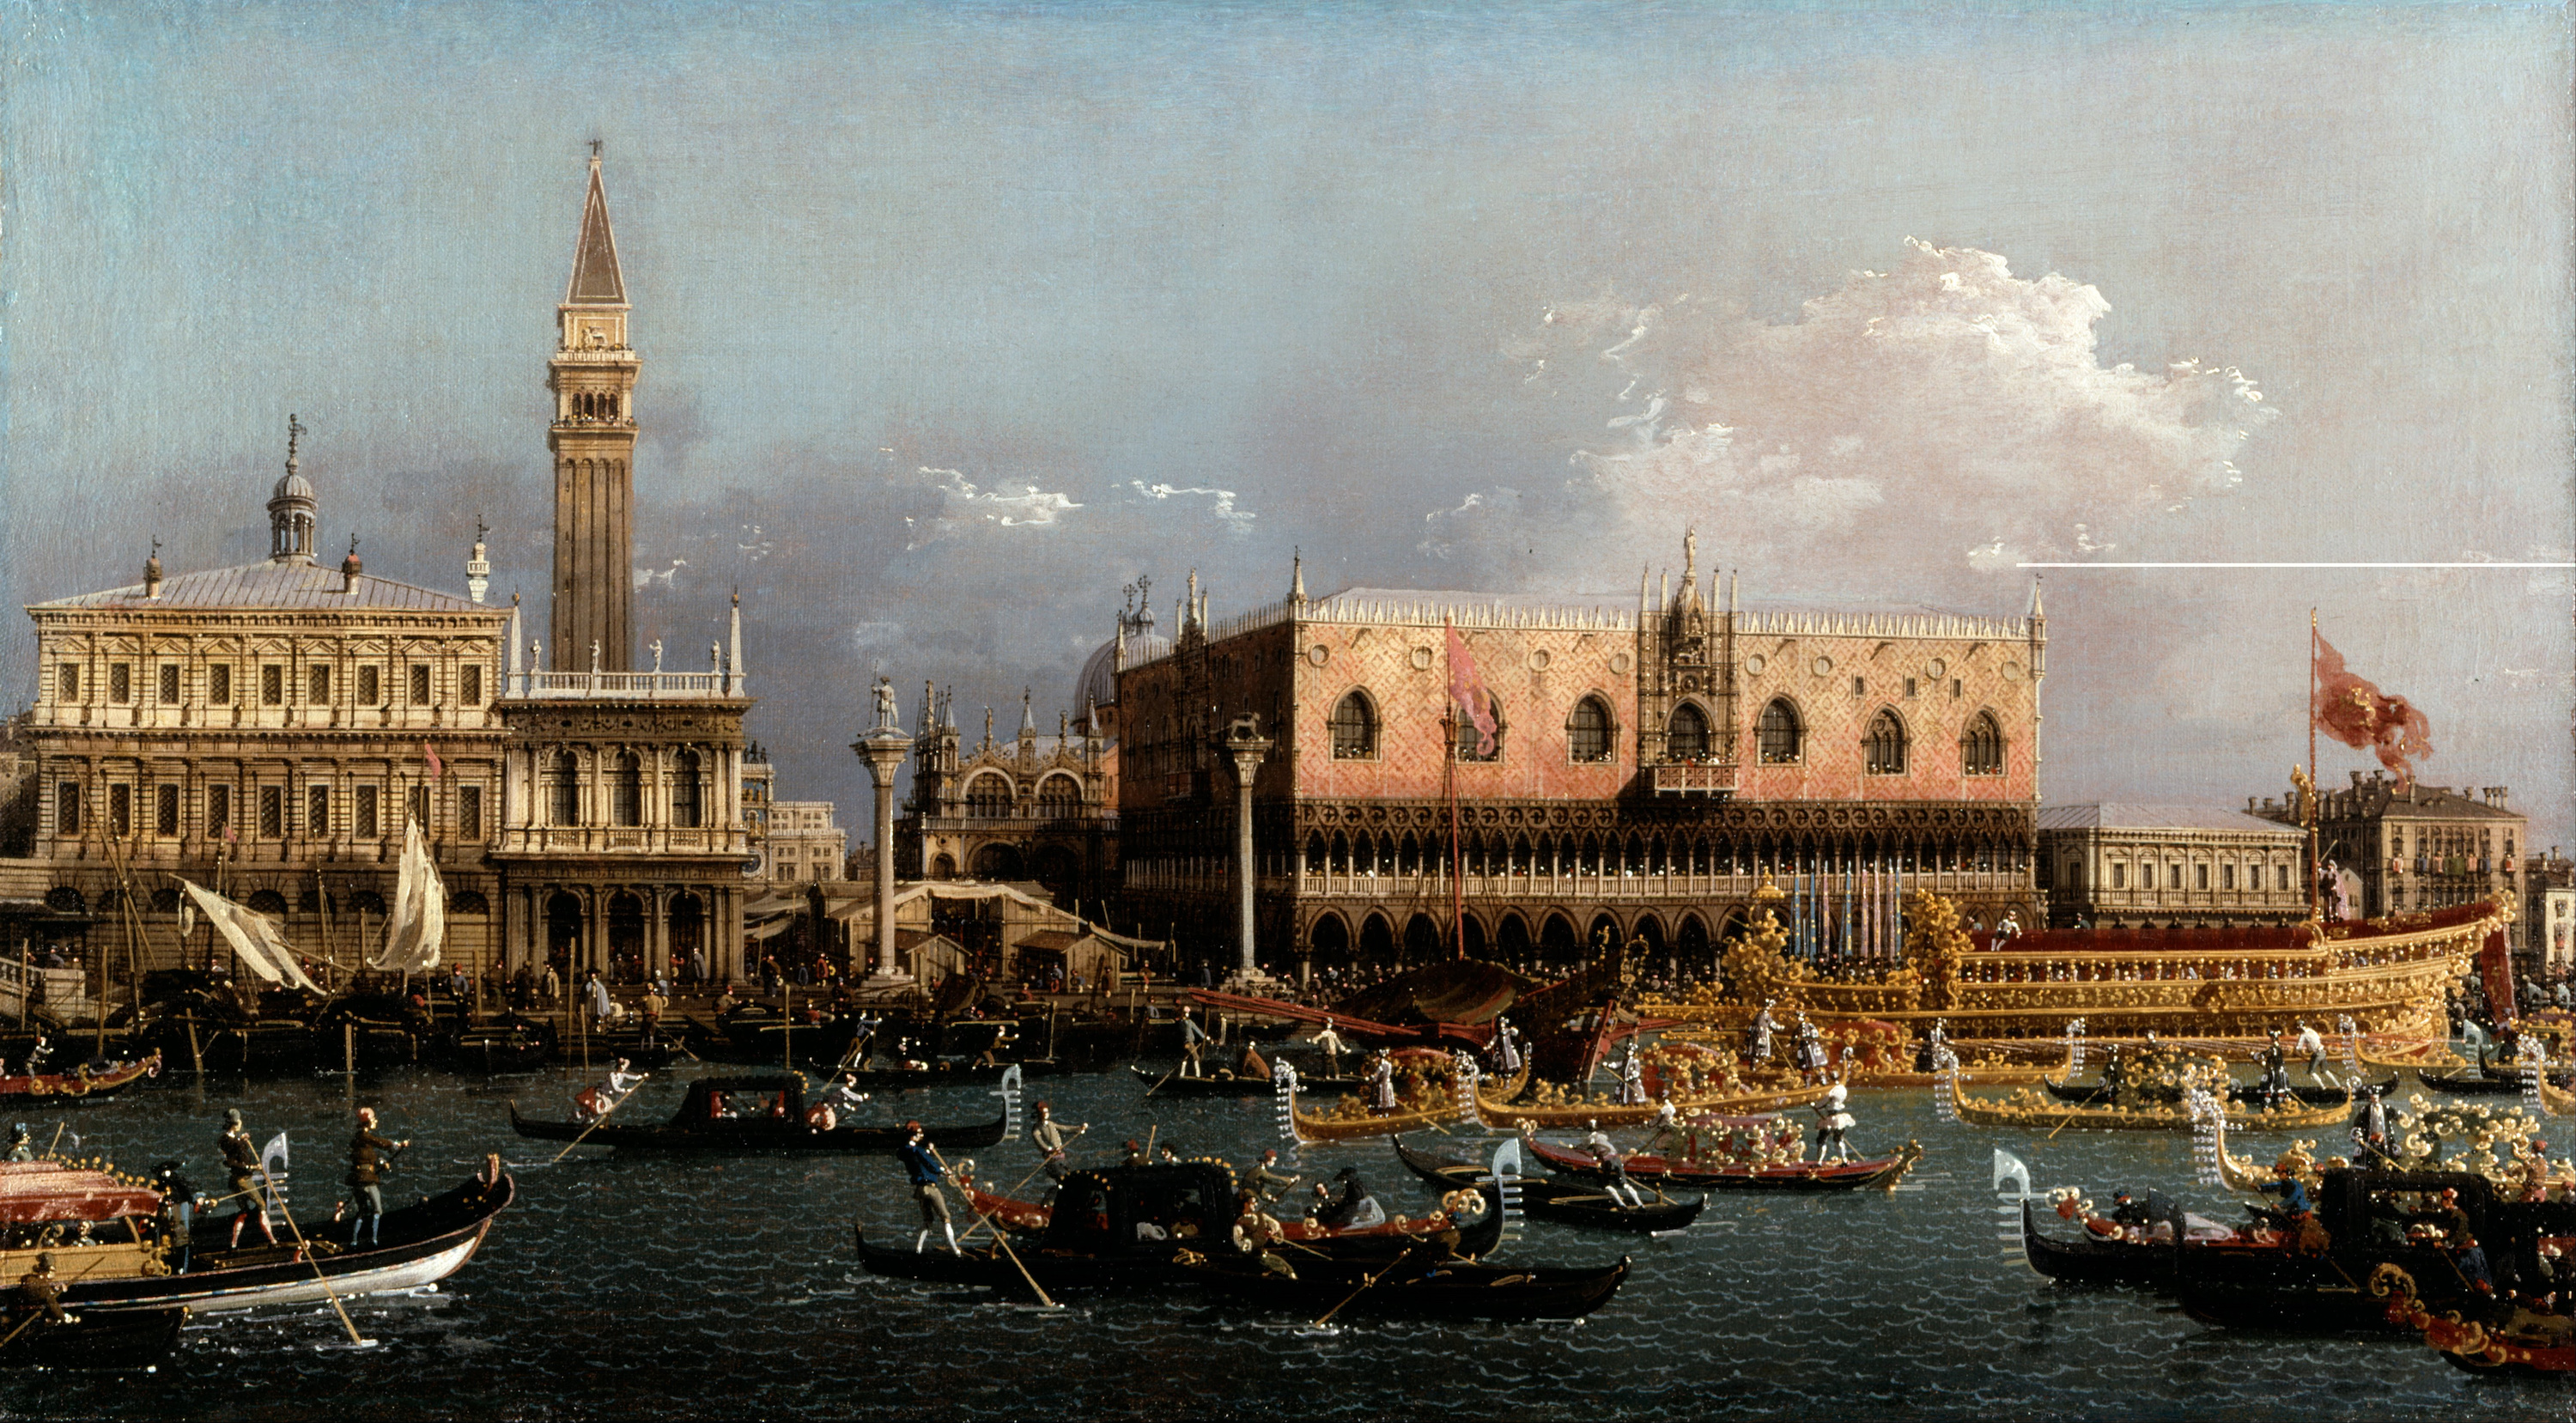 Der Bucintoro am Molo am Himmelfahrtstag by Giovanni Antonio Canal (Canaletto) - 1760 - 101.8 x 58.3 cm Dulwich Picture Gallery